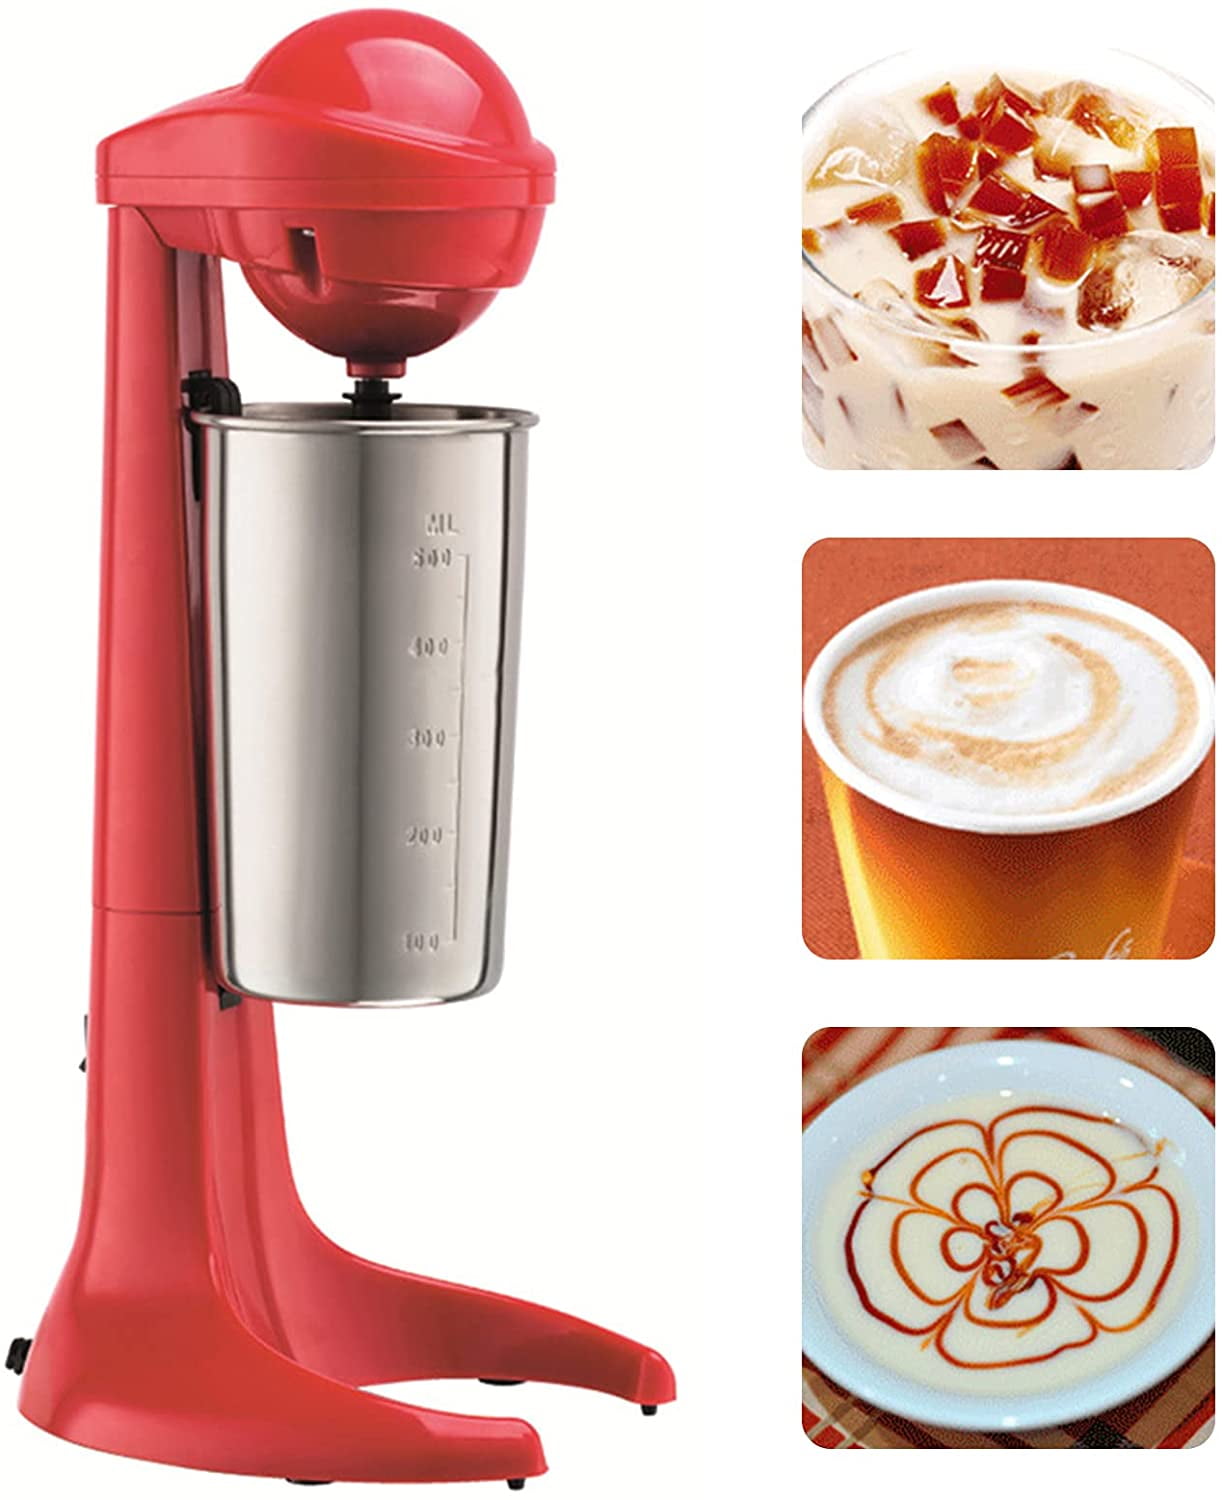 Milkshake Maker, Stainless Steel Drink Mixer, Electric Commercial Milk  shake Machine, for Frappe, Frothy Milk, Juices and Smoothies, Mixer Batter